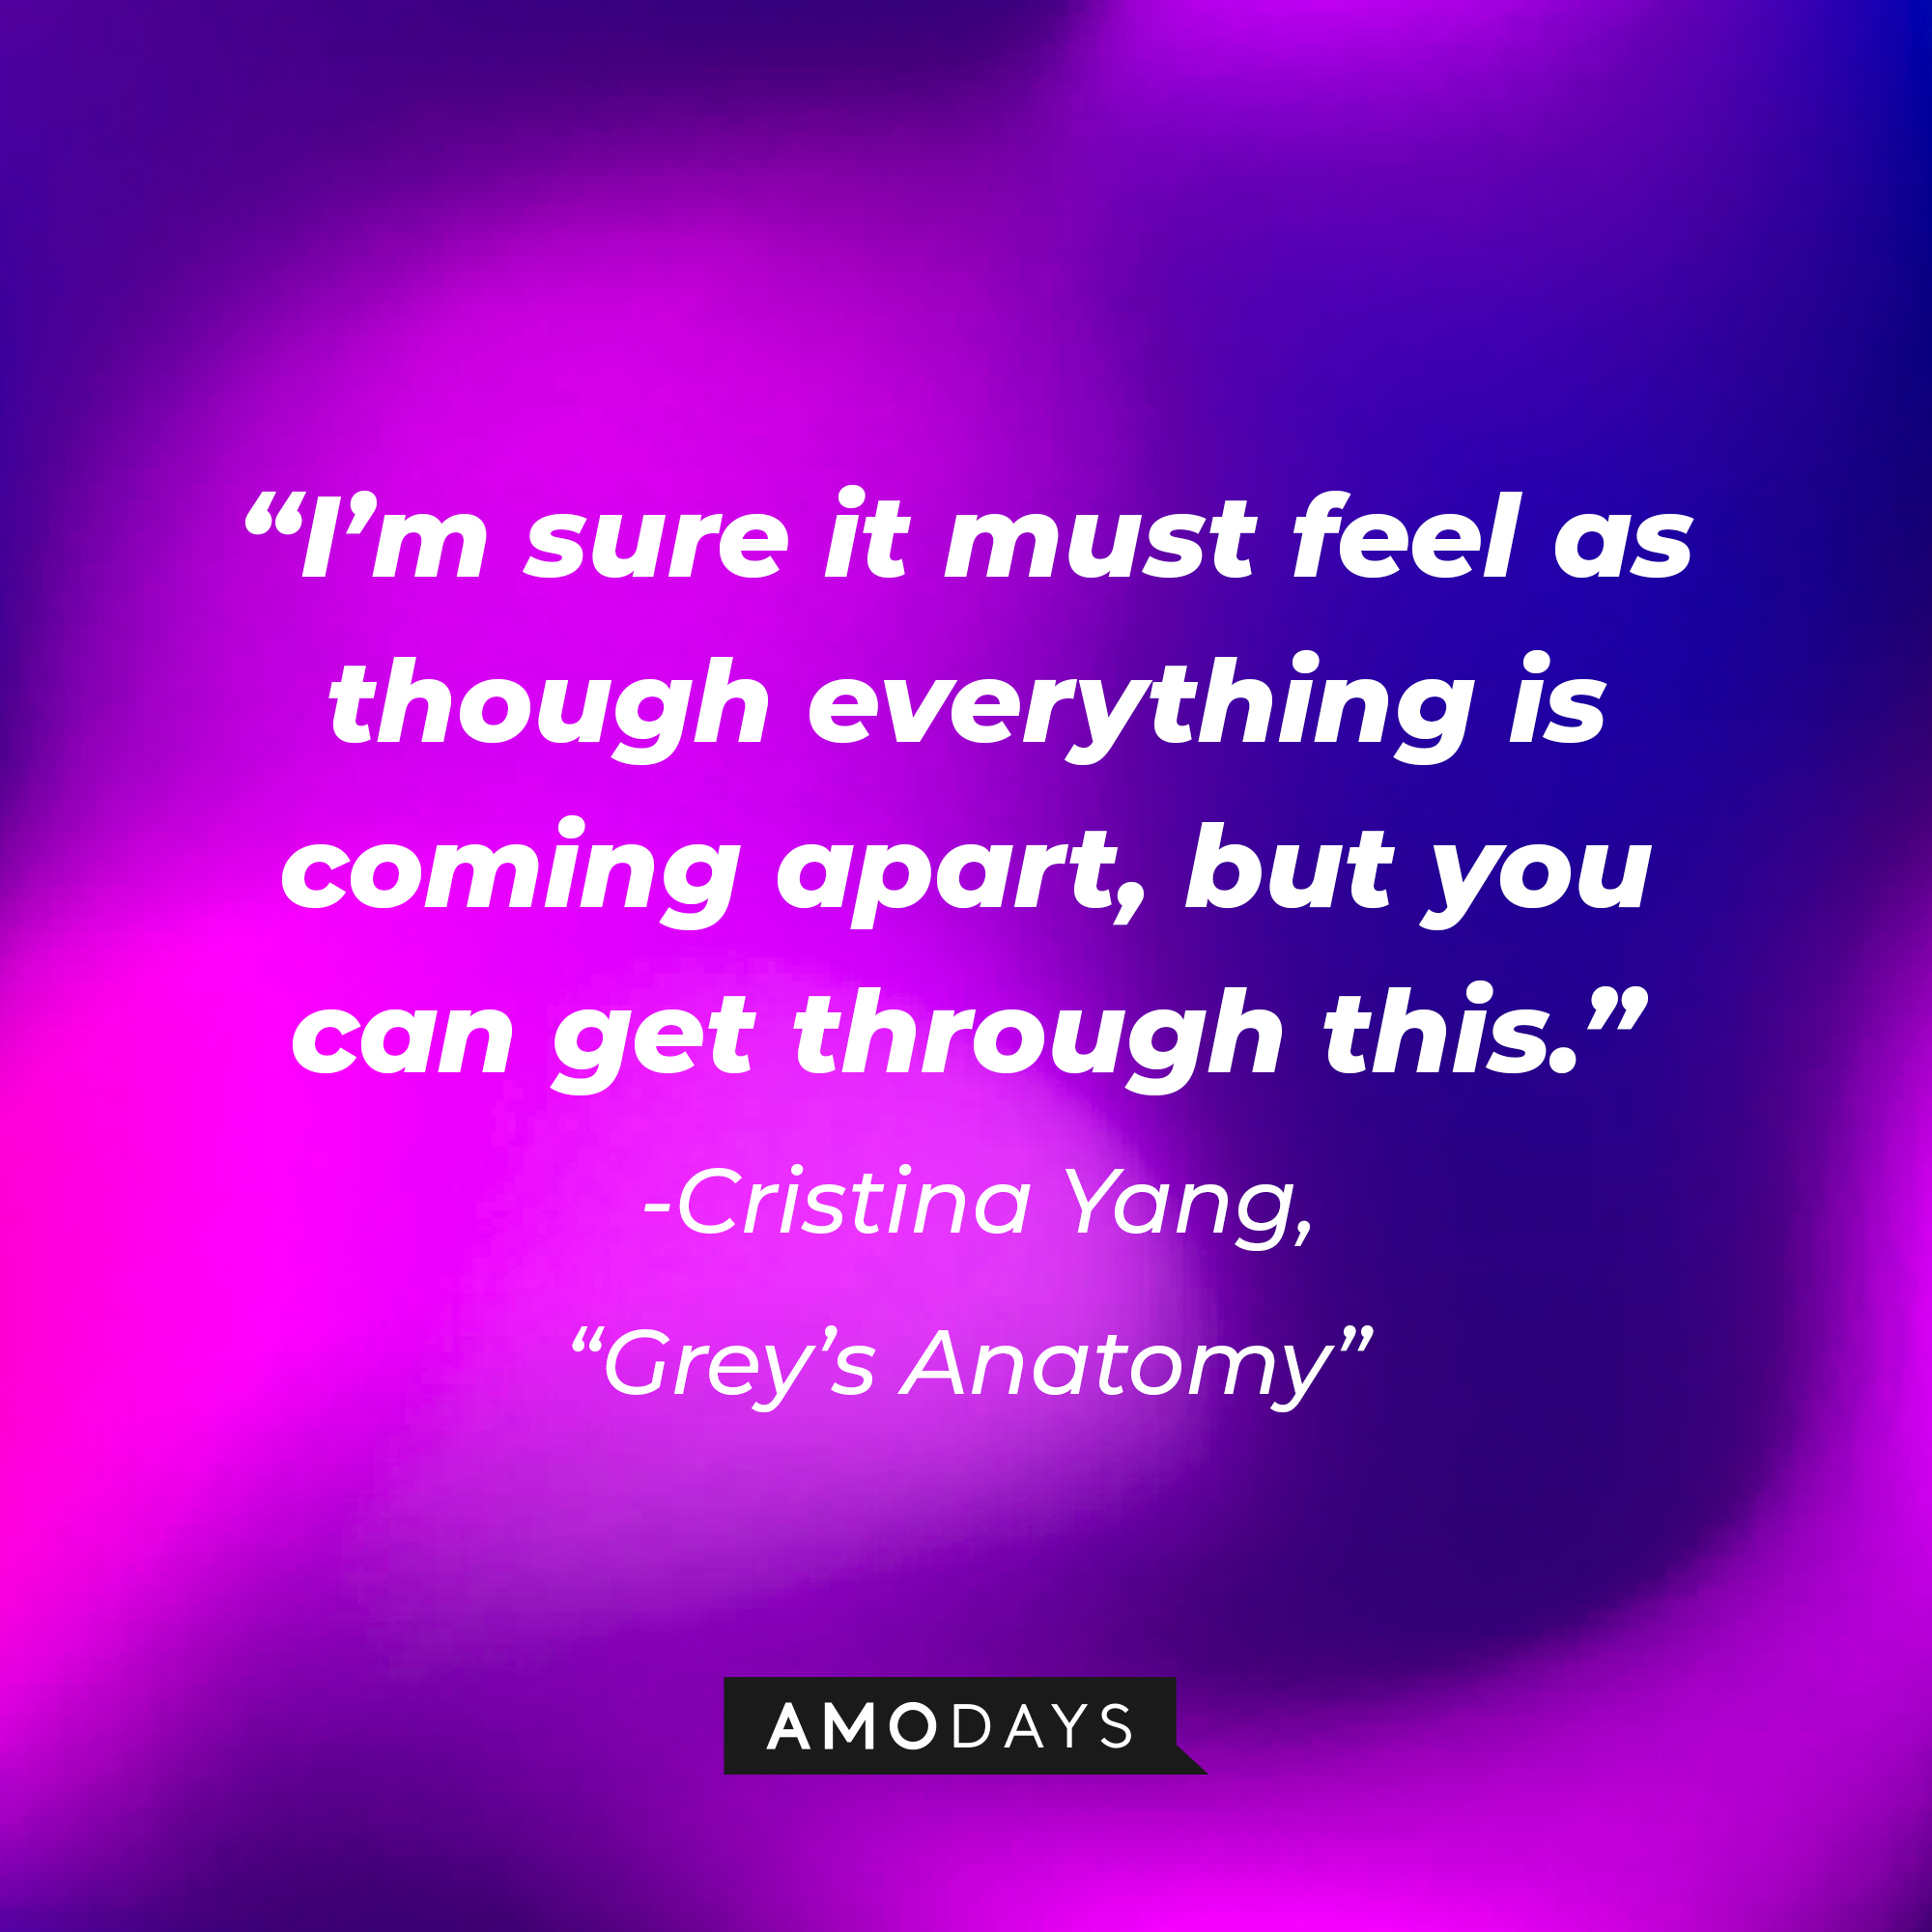 Cristina Yang's quote on "Grey's Anatomy:" “I’m sure it must feel as though everything is coming apart, but you can get through this.” | Source: AmoDays